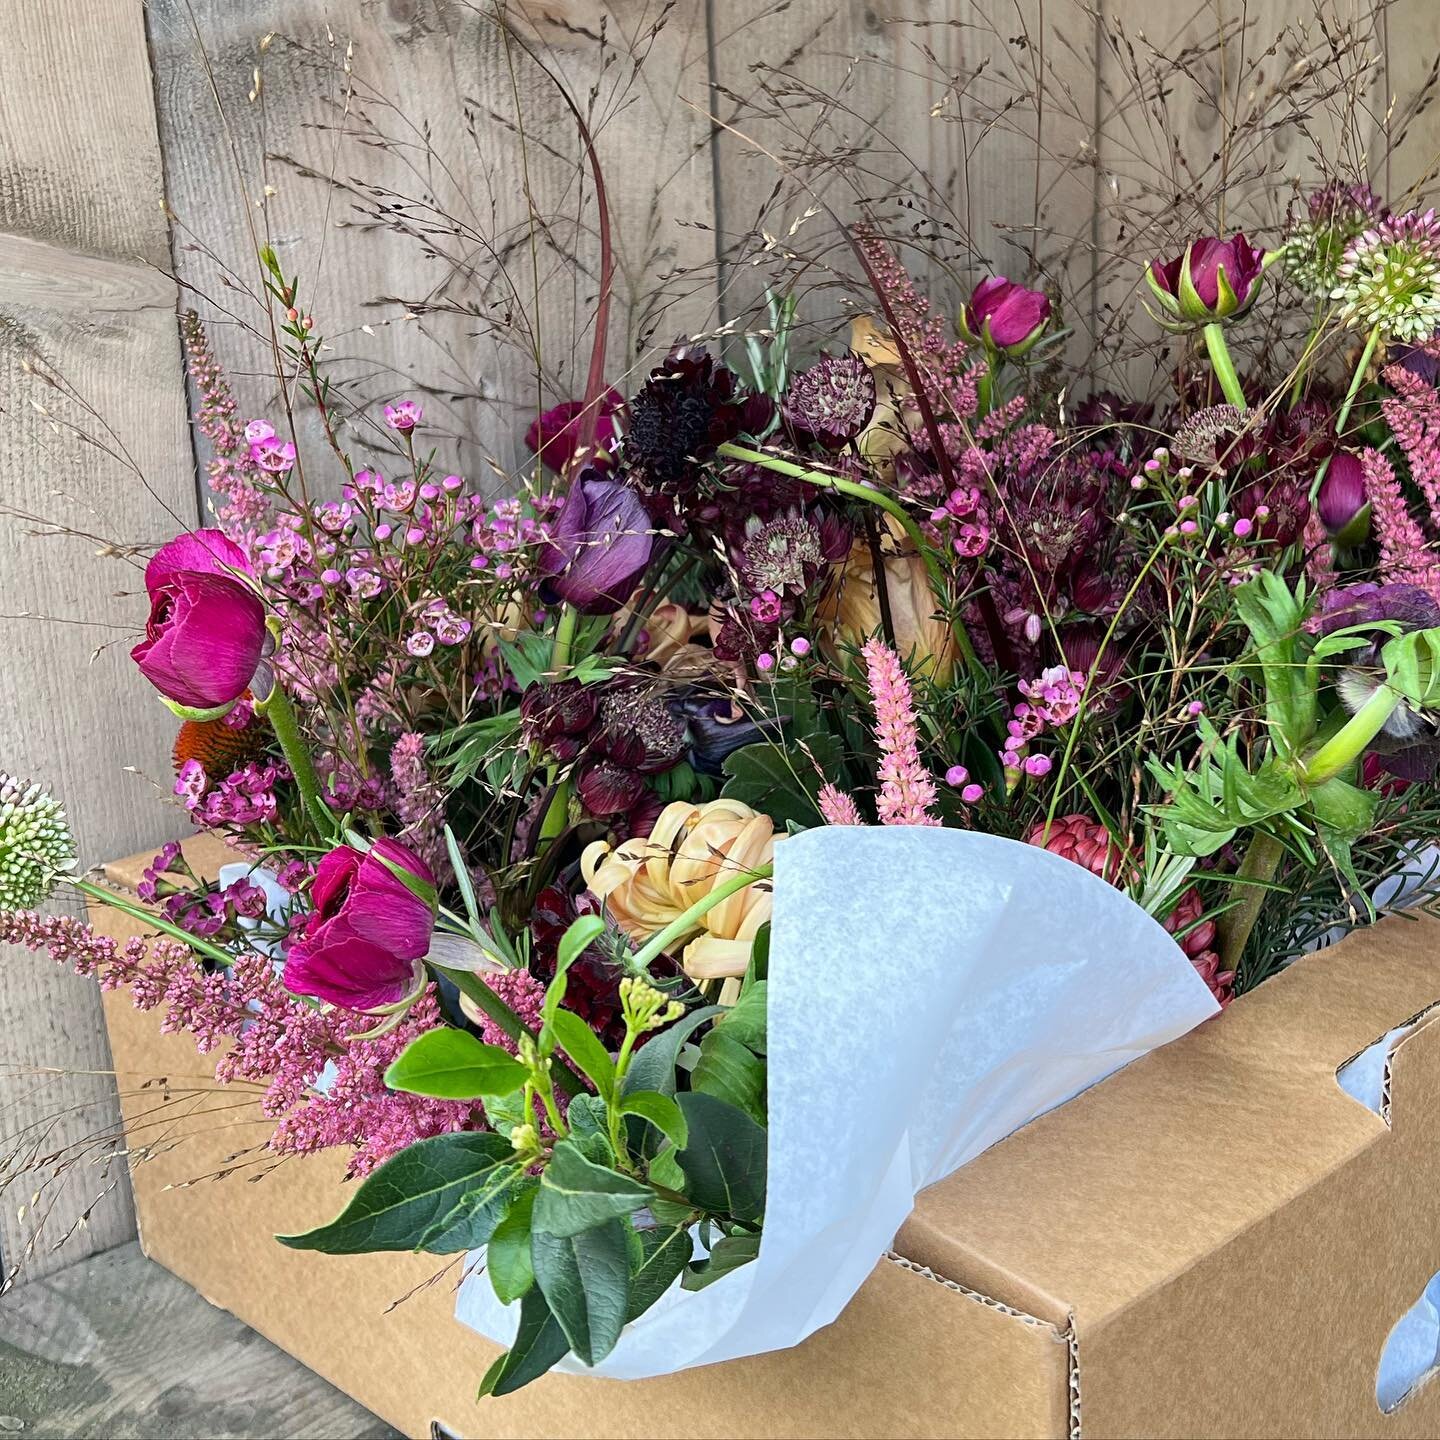 So inspired by these beautiful flowers @scarletandviolet - heading home after a marvelous trip , way too many delish meals and 🍹🇬🇧seeing my family friends art and a fab party too! @roman_and_williams_ Thankyou for sharing your 20 th anniversary 🍾